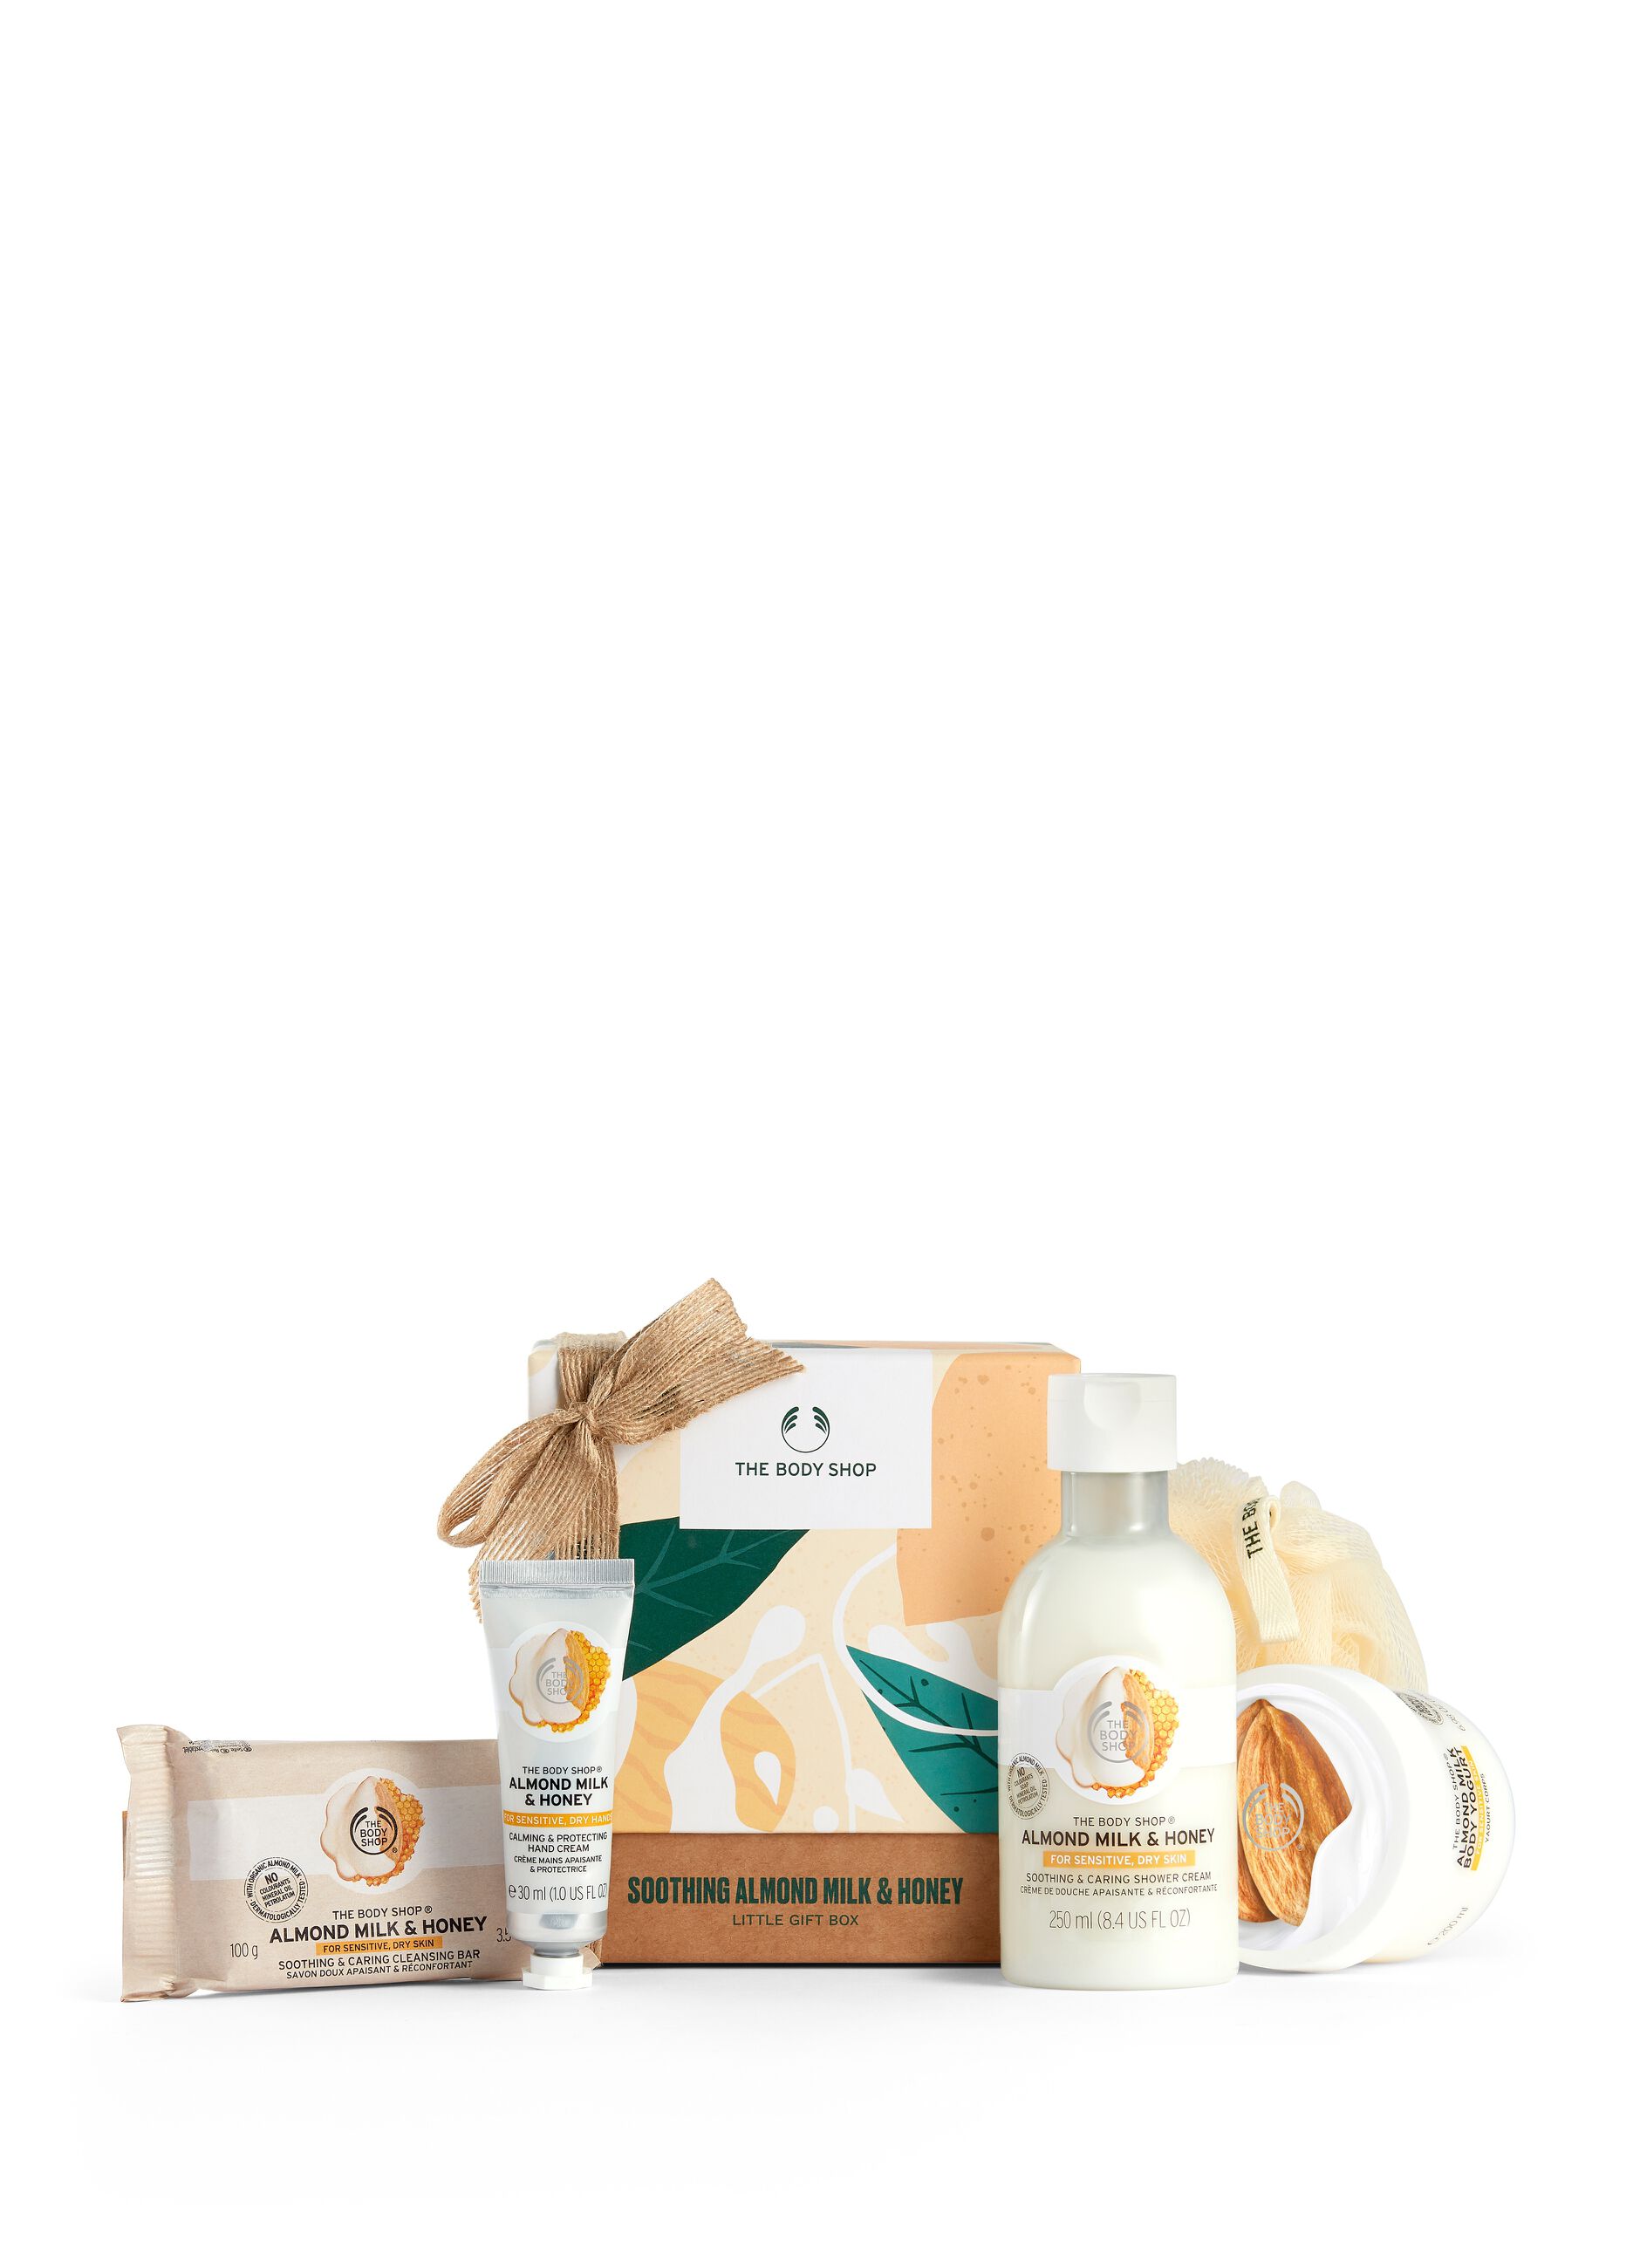 The Body Shop small almond milk and honey gift box